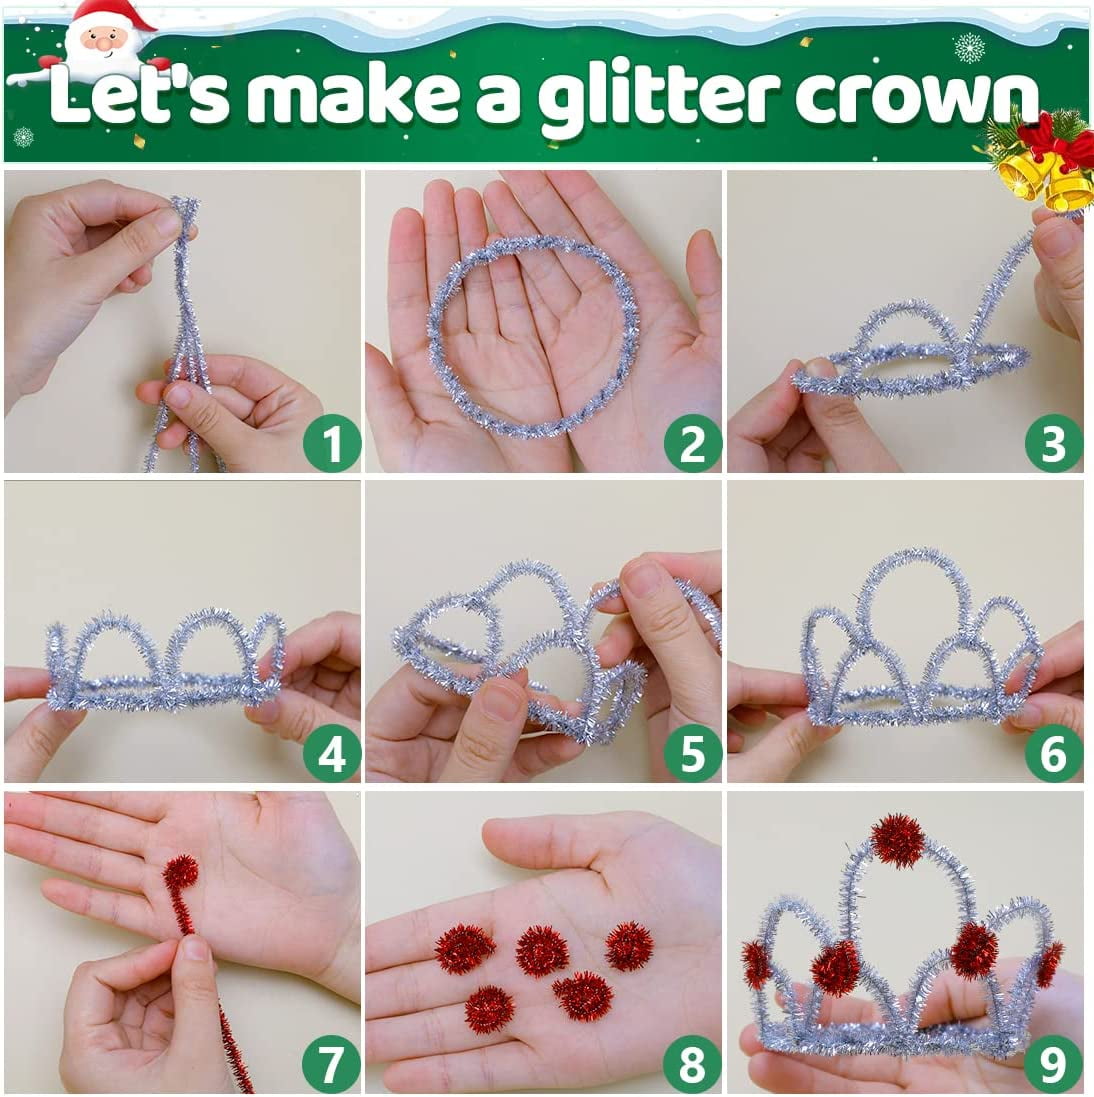 Pipe Cleaners, Pipe Cleaners Craft, Arts and Crafts, Crafts, Craft Supplies,  Art Supplies (Silver Glittery)… - Yahoo Shopping